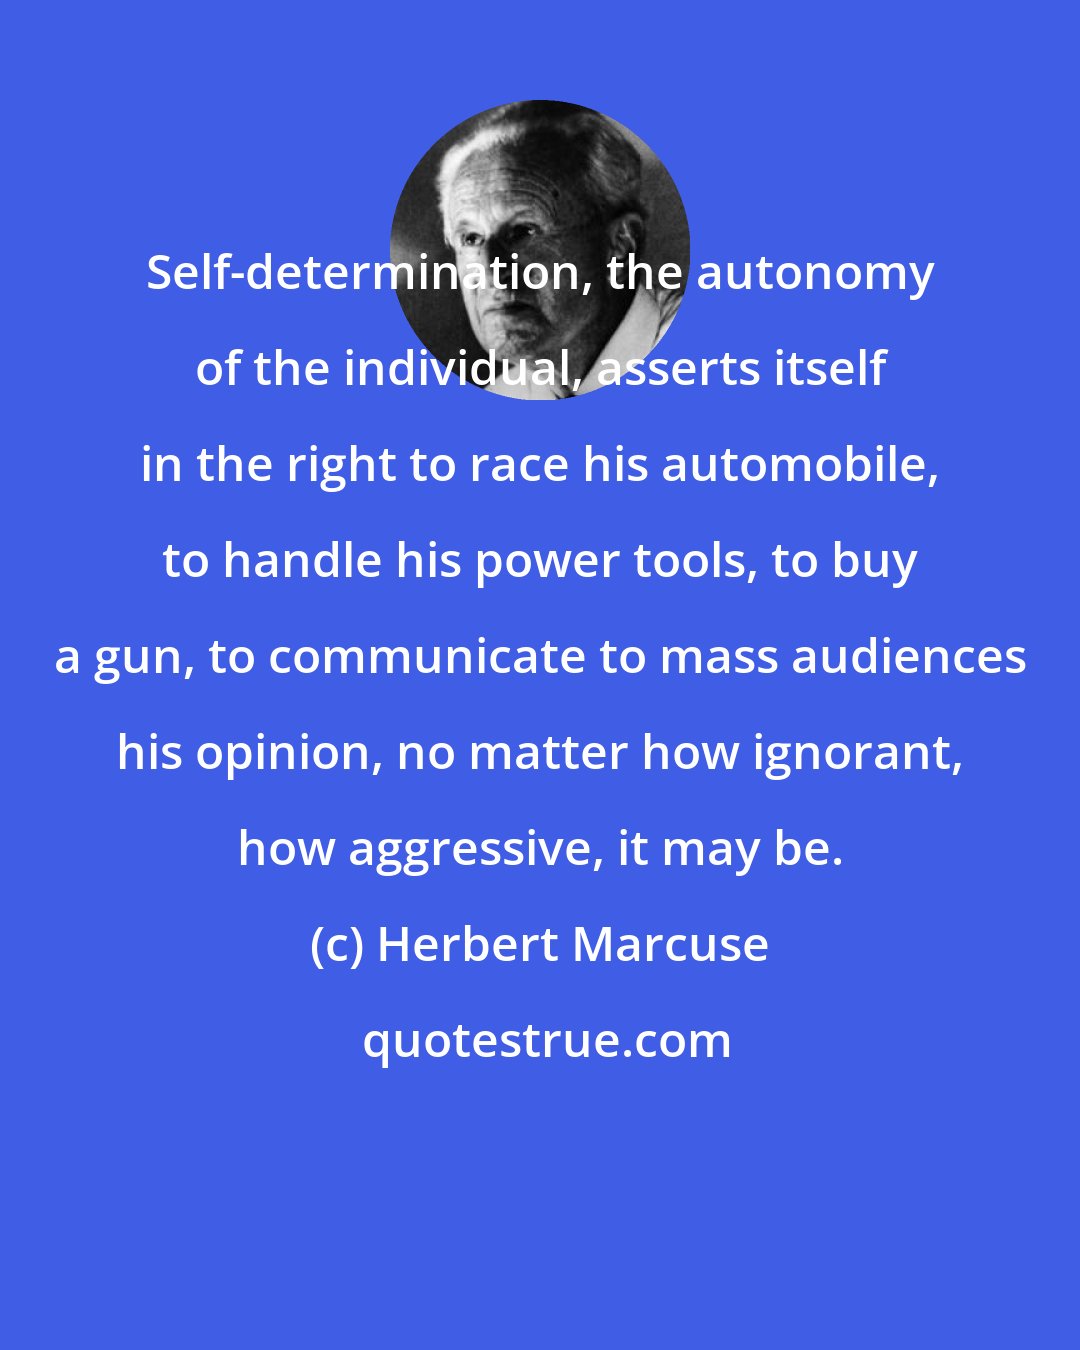 Herbert Marcuse: Self-determination, the autonomy of the individual, asserts itself in the right to race his automobile, to handle his power tools, to buy a gun, to communicate to mass audiences his opinion, no matter how ignorant, how aggressive, it may be.